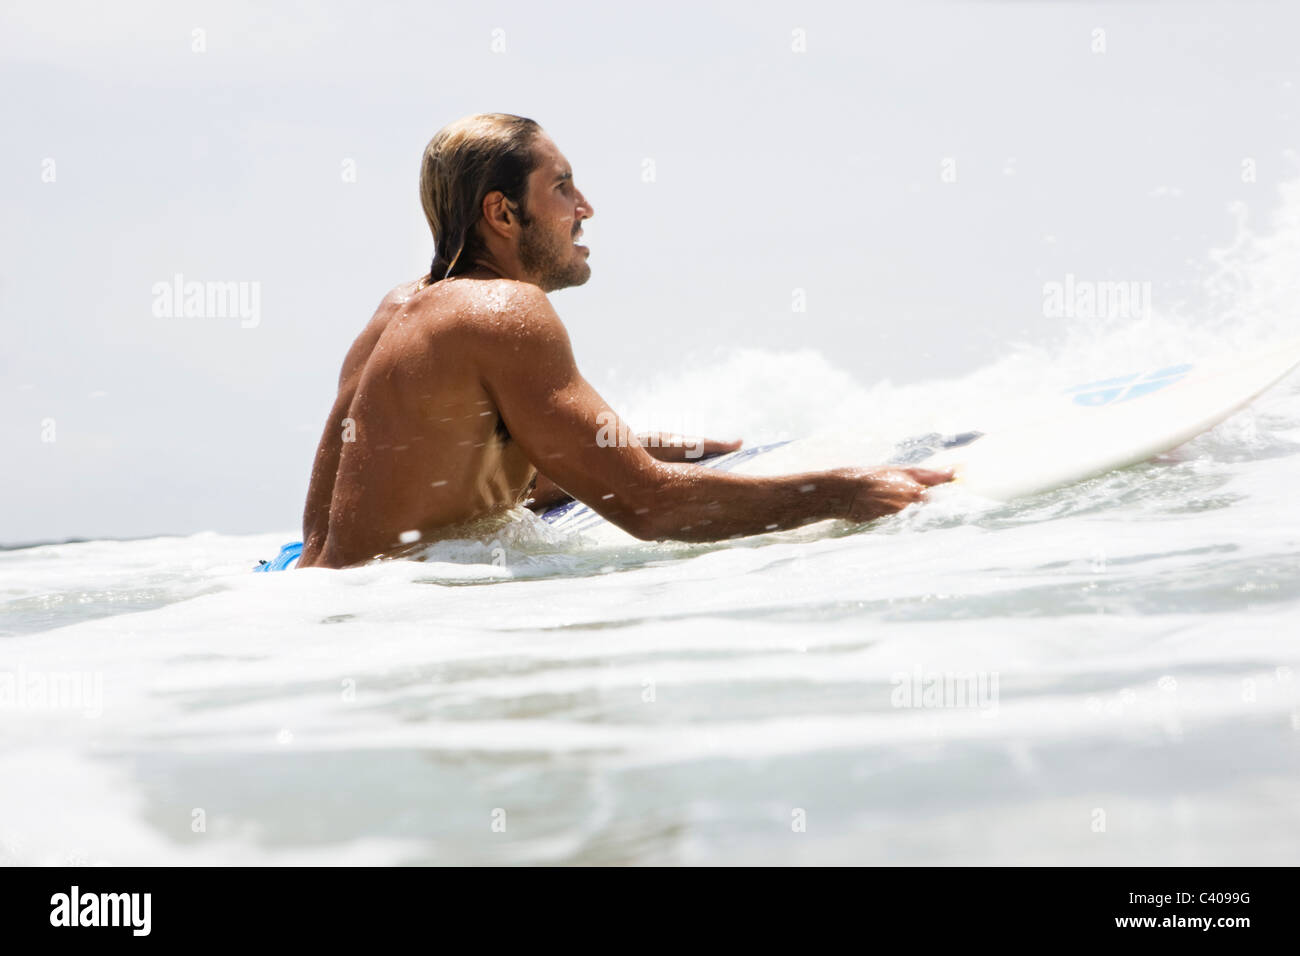 Guy on surfboard  waiting for wave Stock Photo